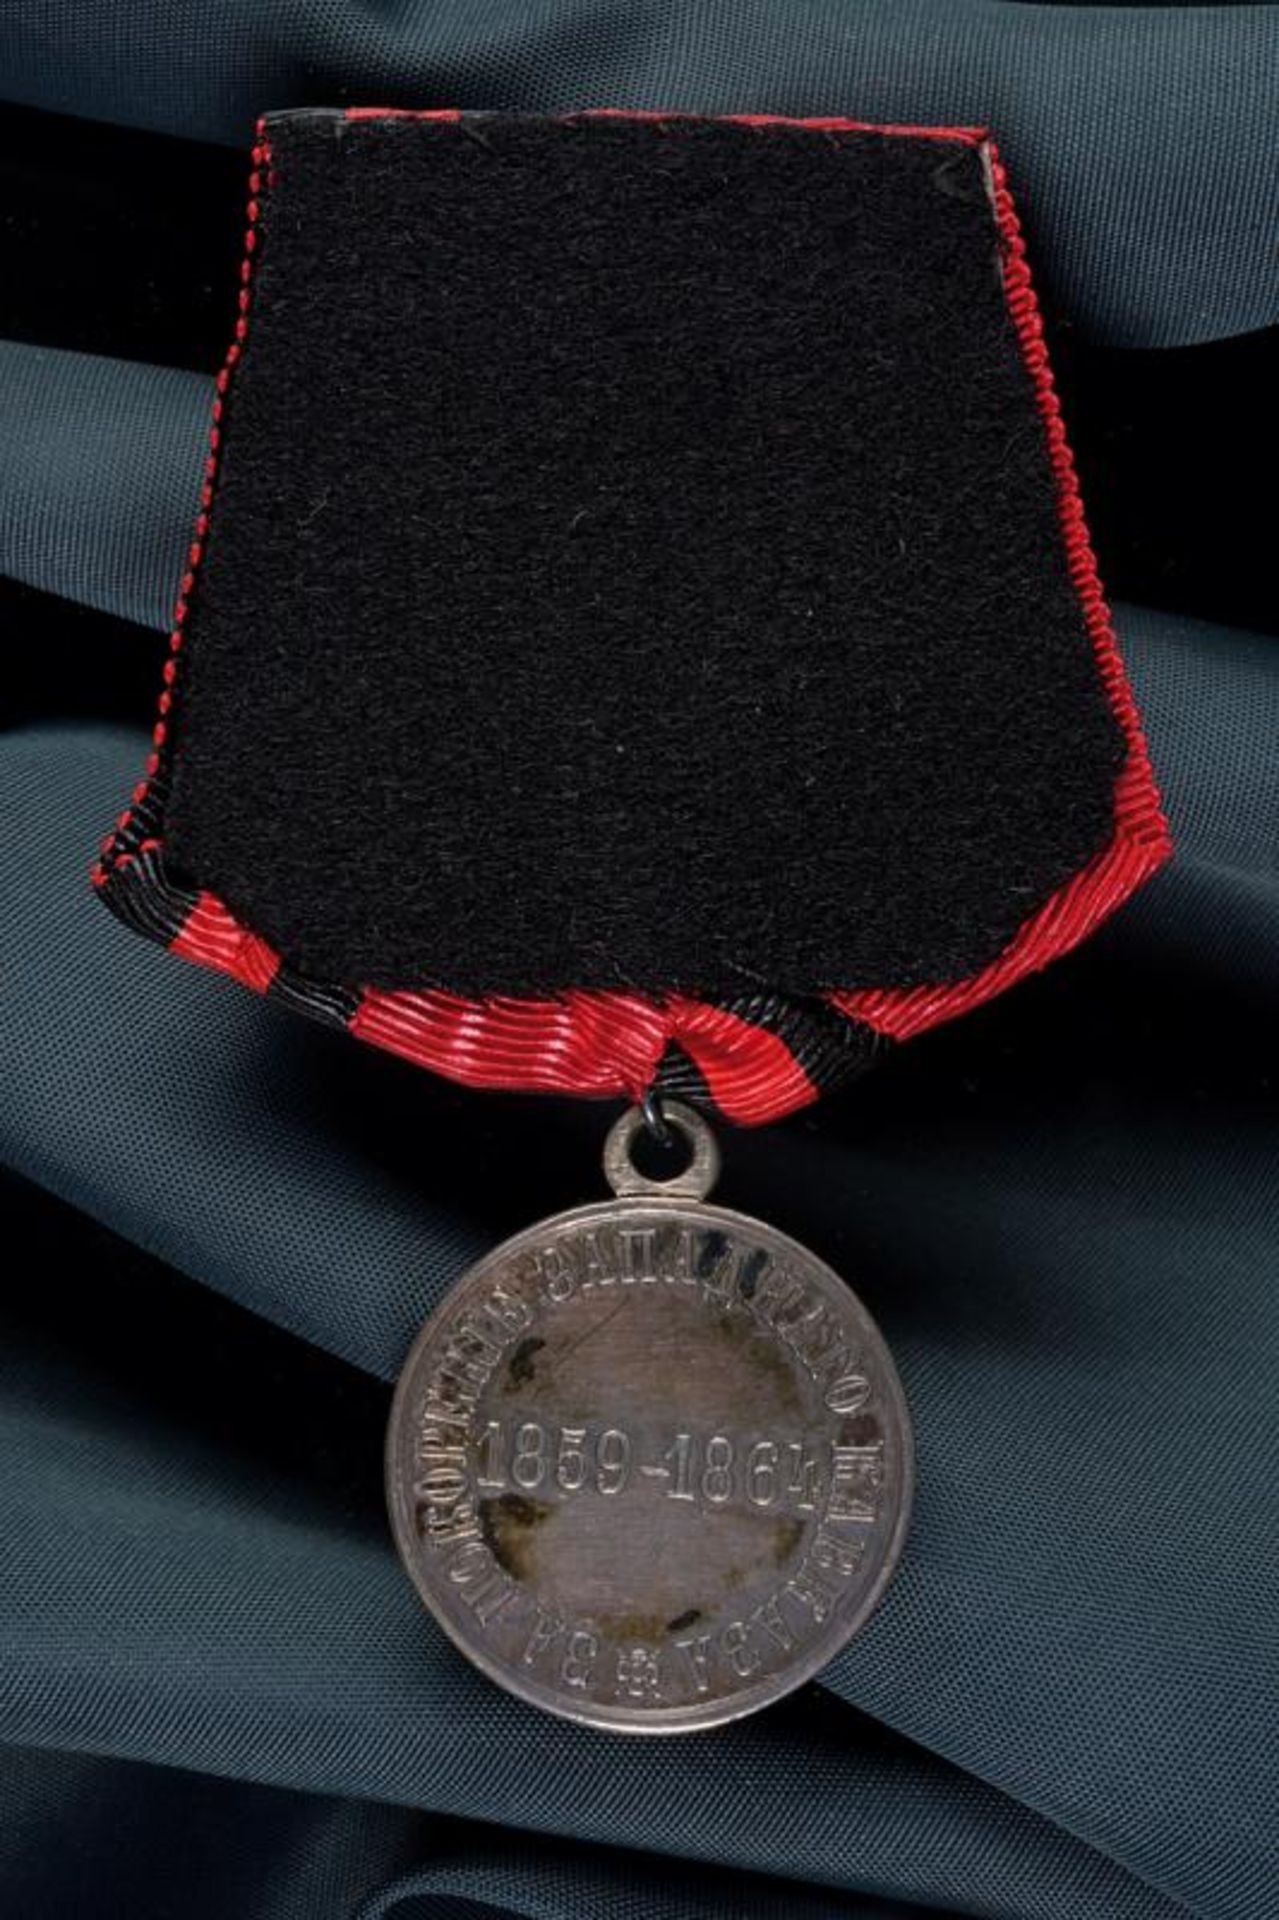 Medal for the campaign of West Caucasus 1859 - 1864 - Image 2 of 2